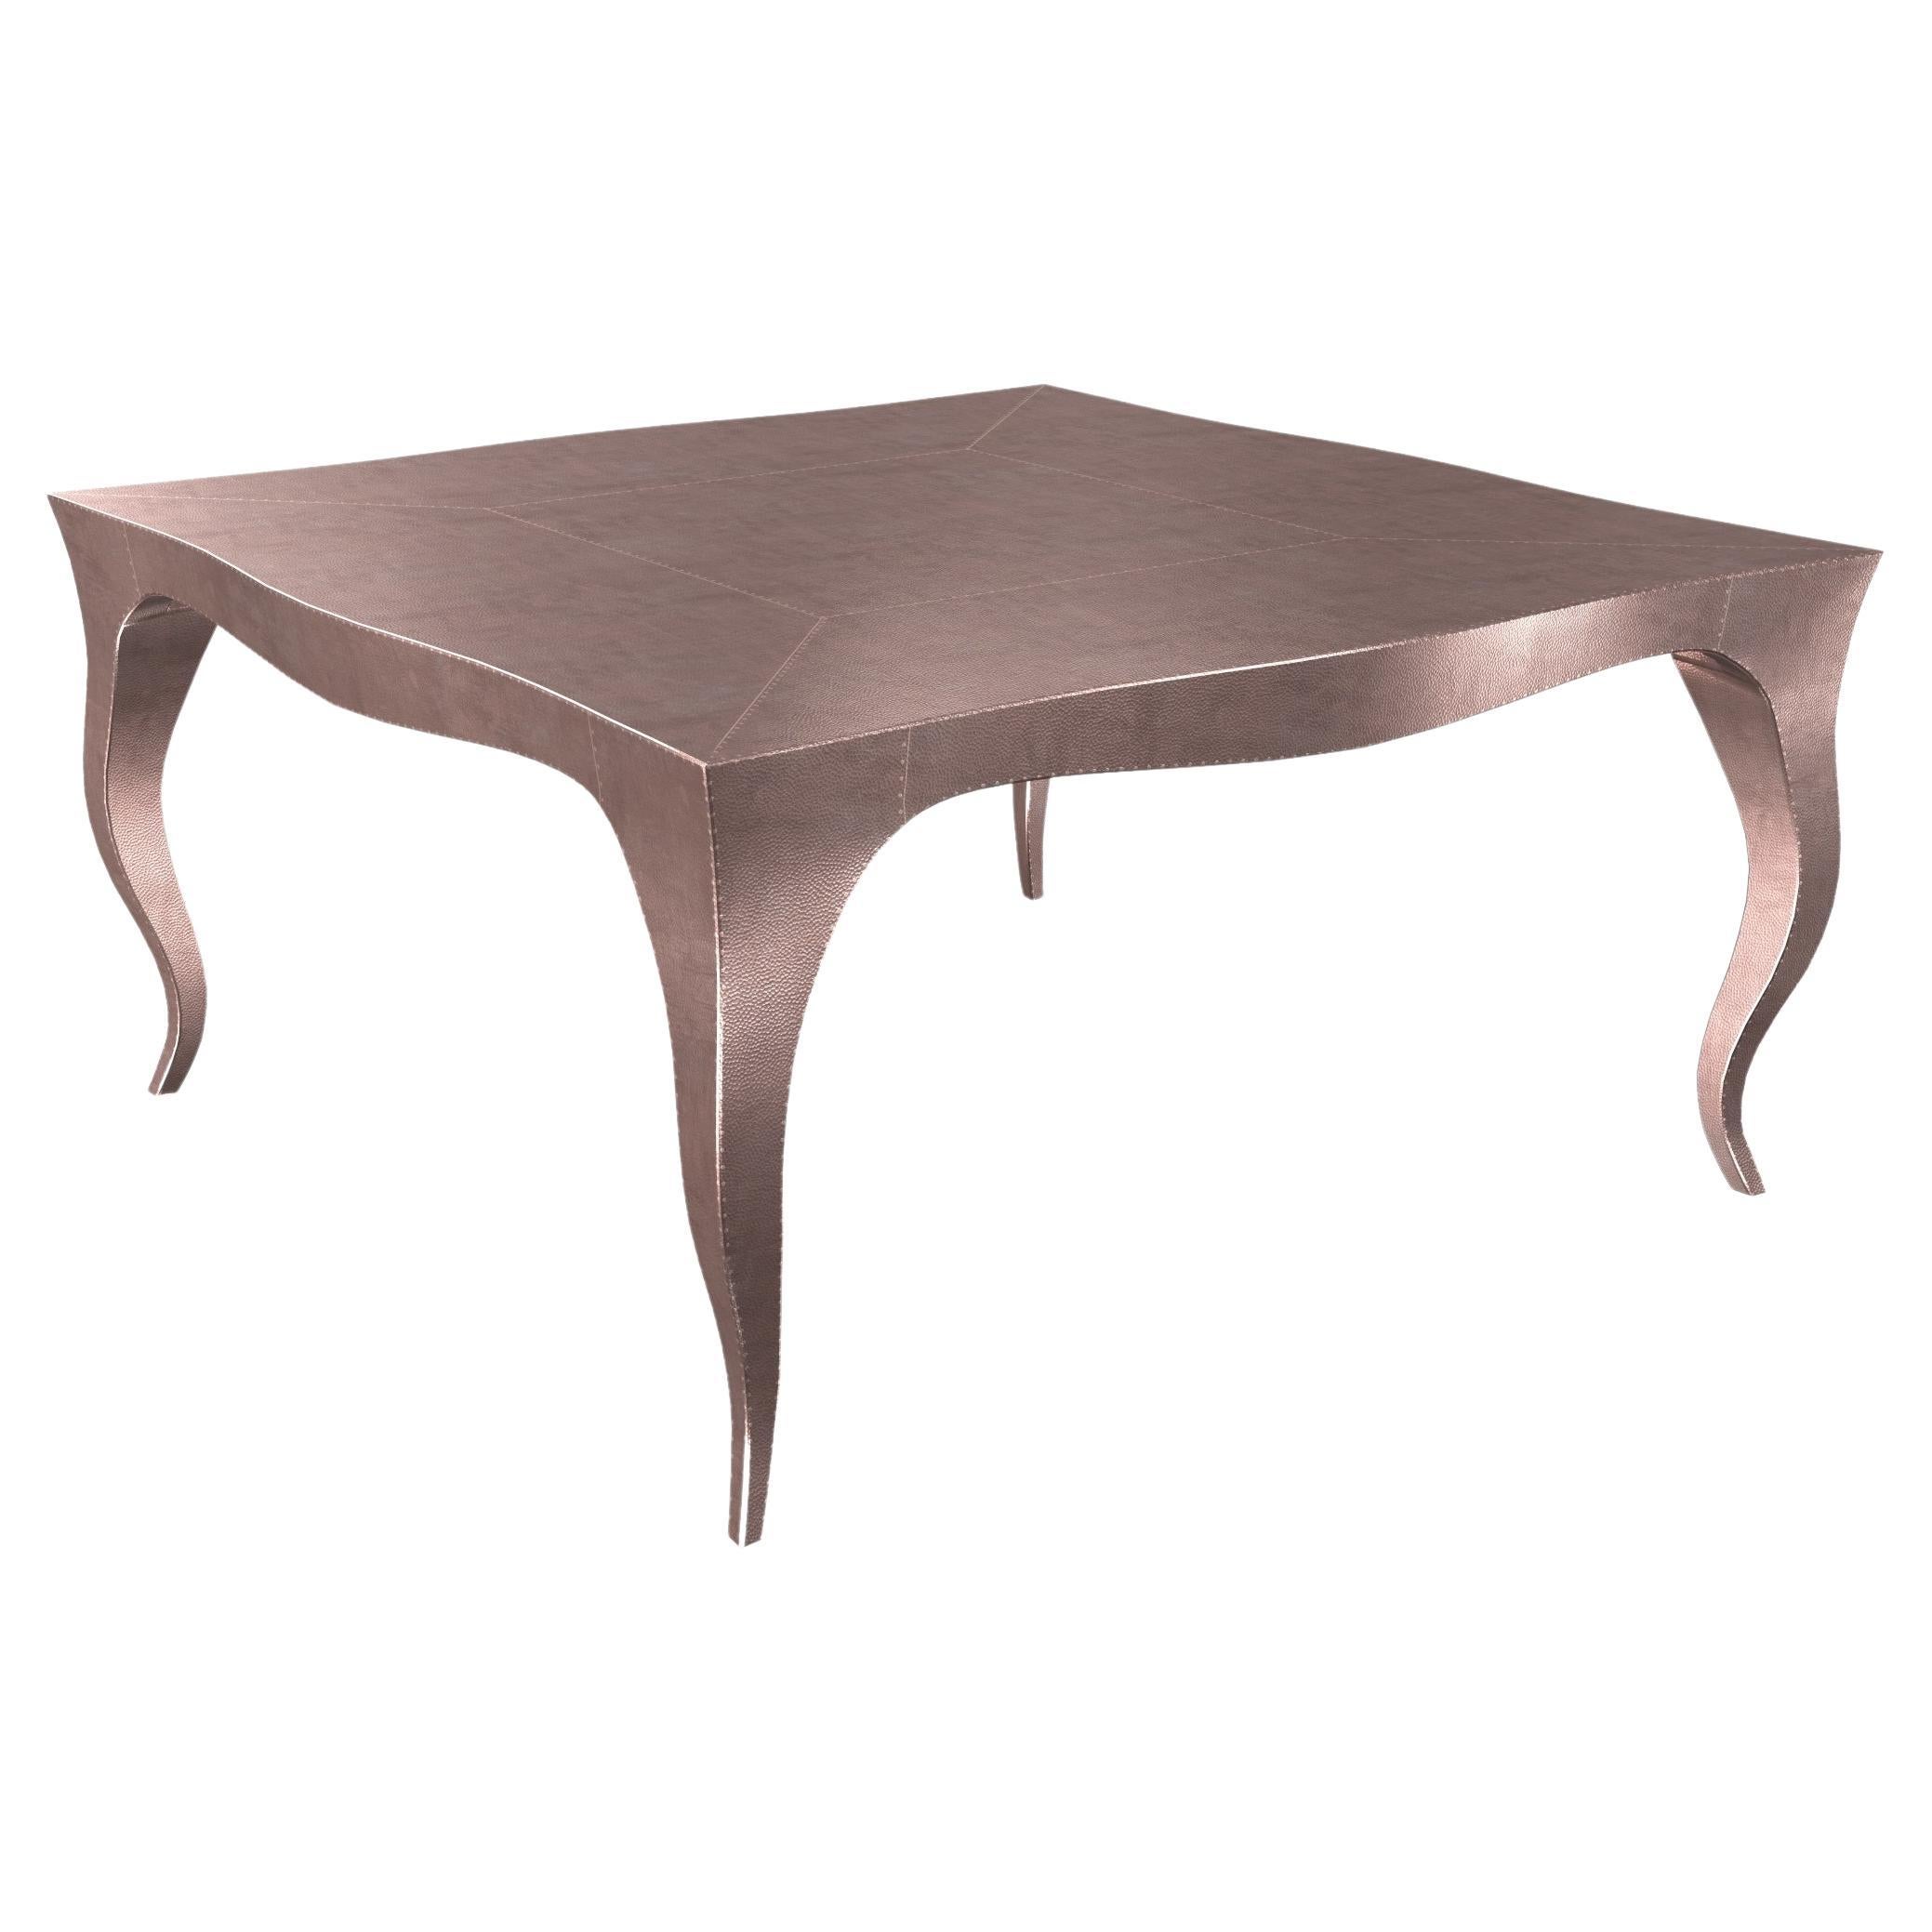 Louise Art Deco Card Tables and Tea Tables Mid.Hammered Copper 18.5x18.5x10 inch For Sale